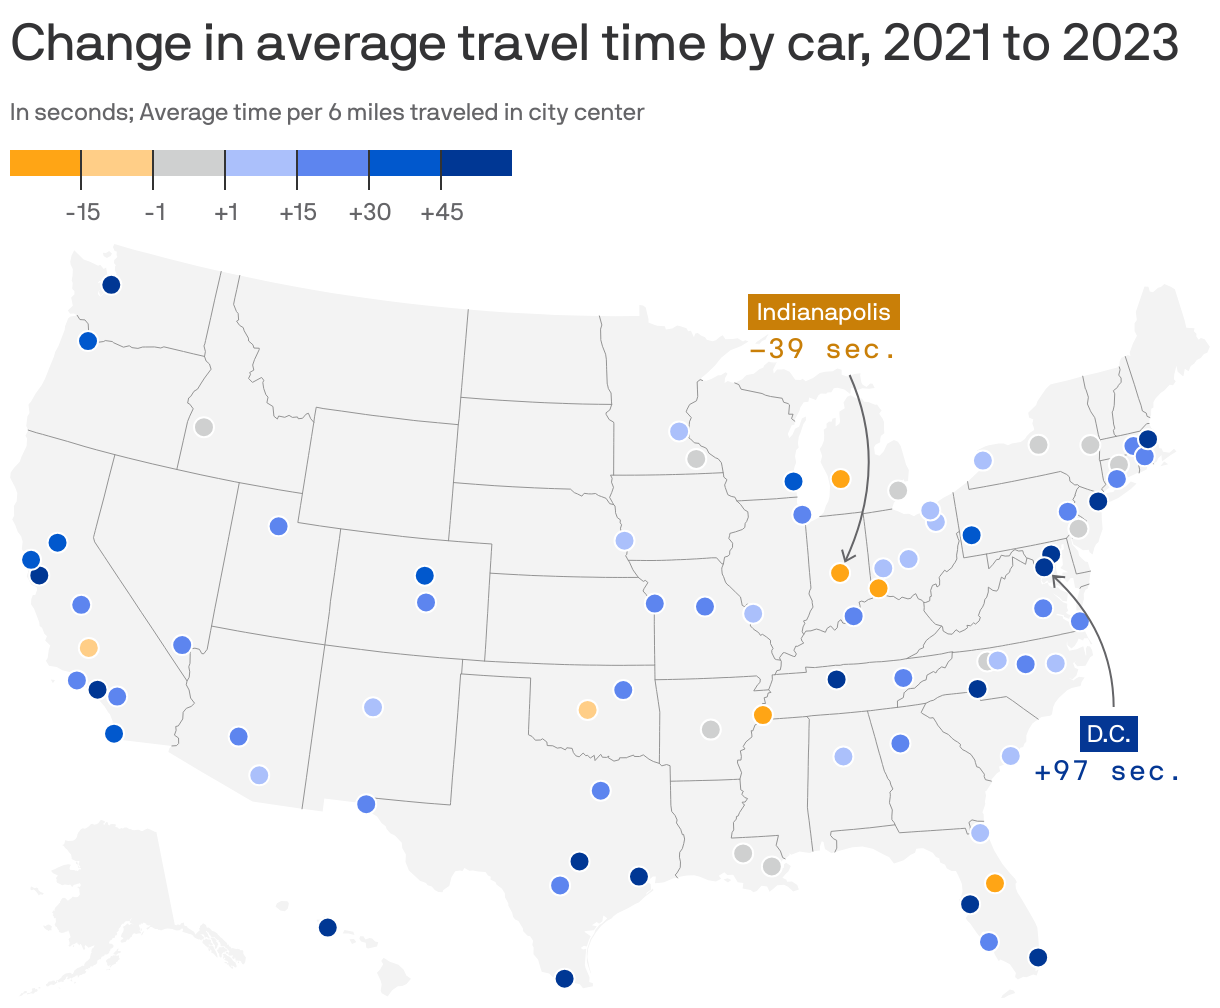 Change in average travel time by car, 2021 to 2023